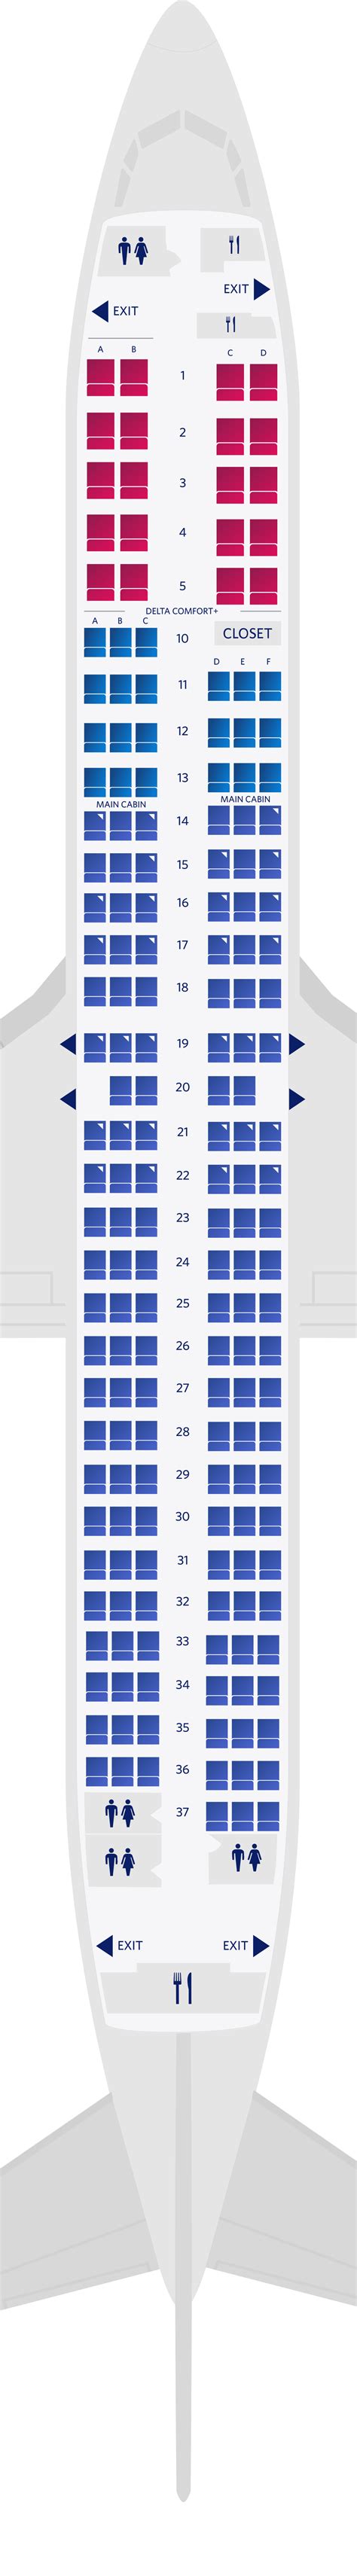 Delta Air Lines' fleet uses various Boeing 737 models, including the 737-700, 737-800, and 737-900ER. The capabilities and features of each of these versions are distinctive. ... According to the Delta Boeing 737 800 seating chart, there is a seating capacity for 126 passengers in Economy class. There are no windows in seats 13A and 13F.. 